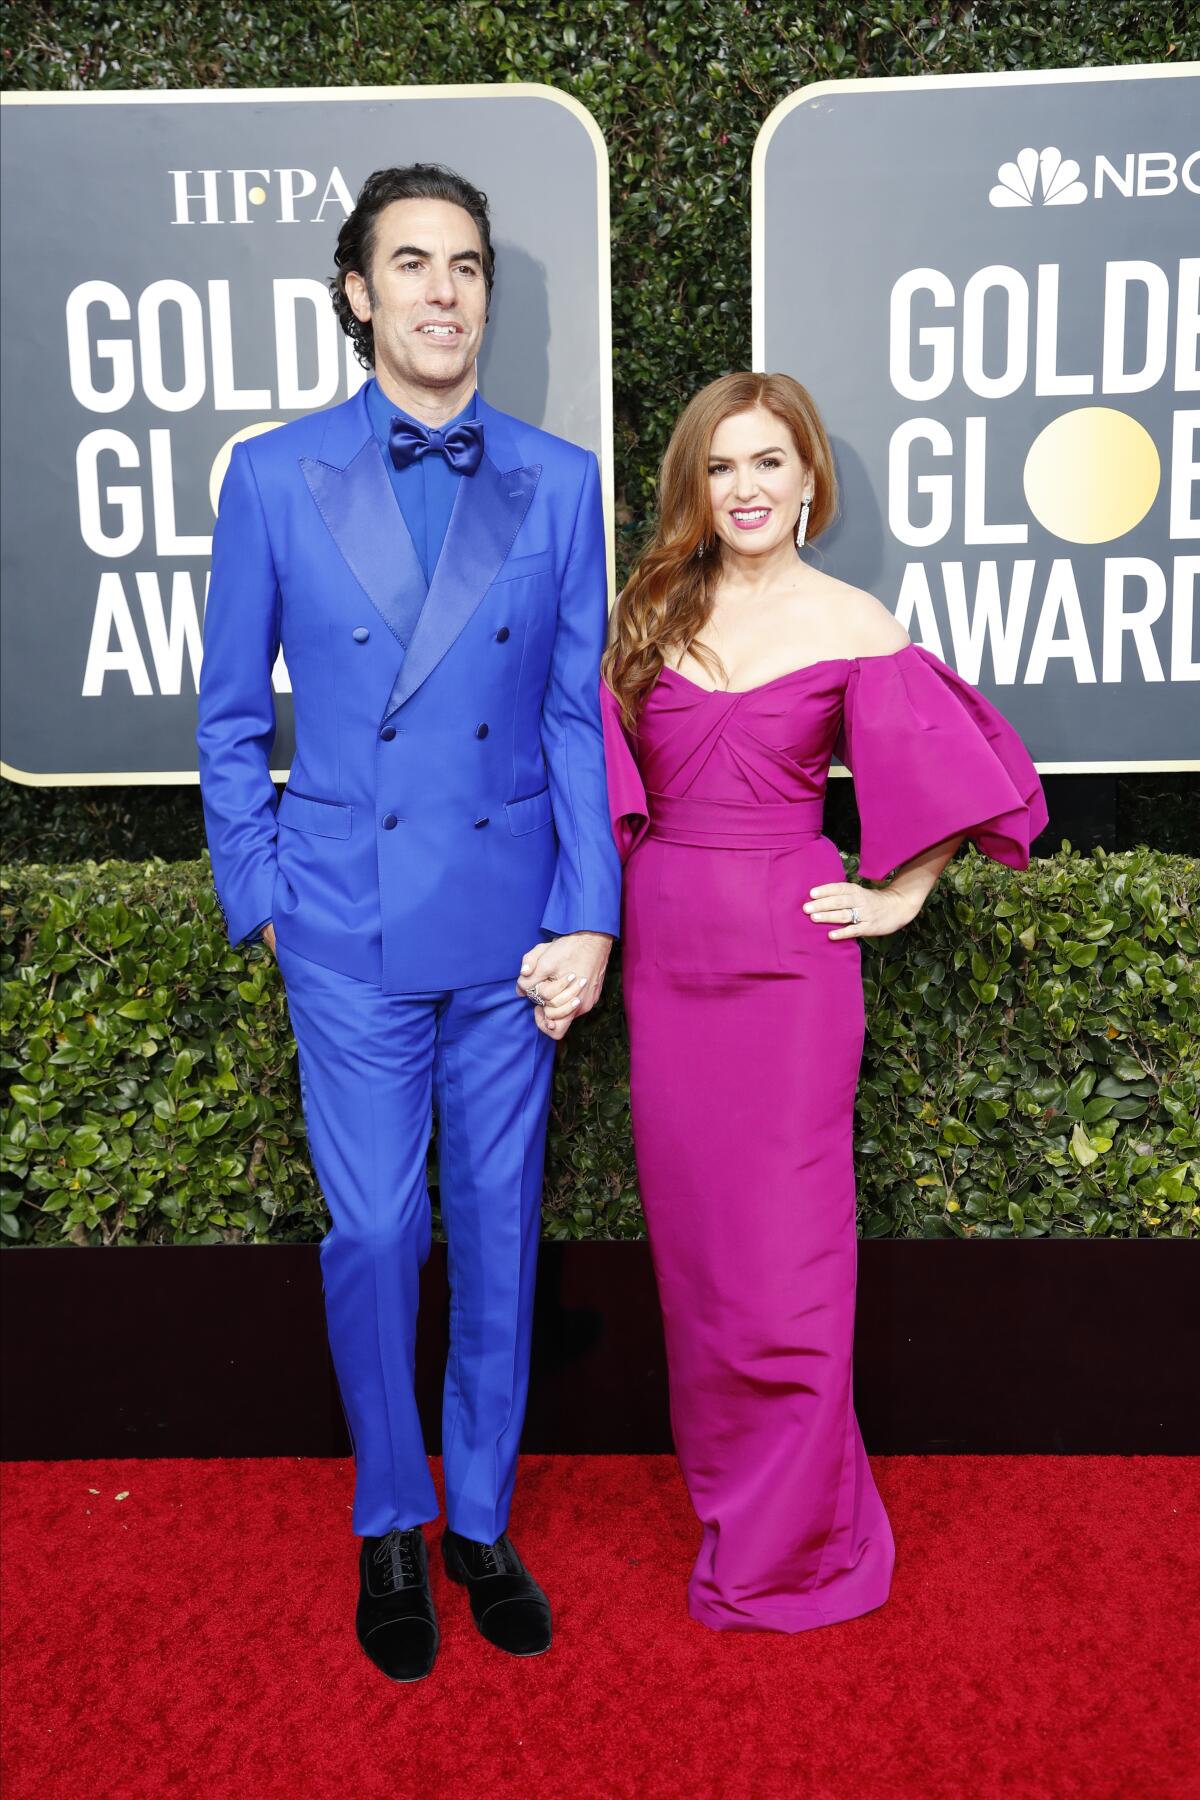 Sacha Baron Cohen and Isla Fisher have split after 13 years of marriage, three kids